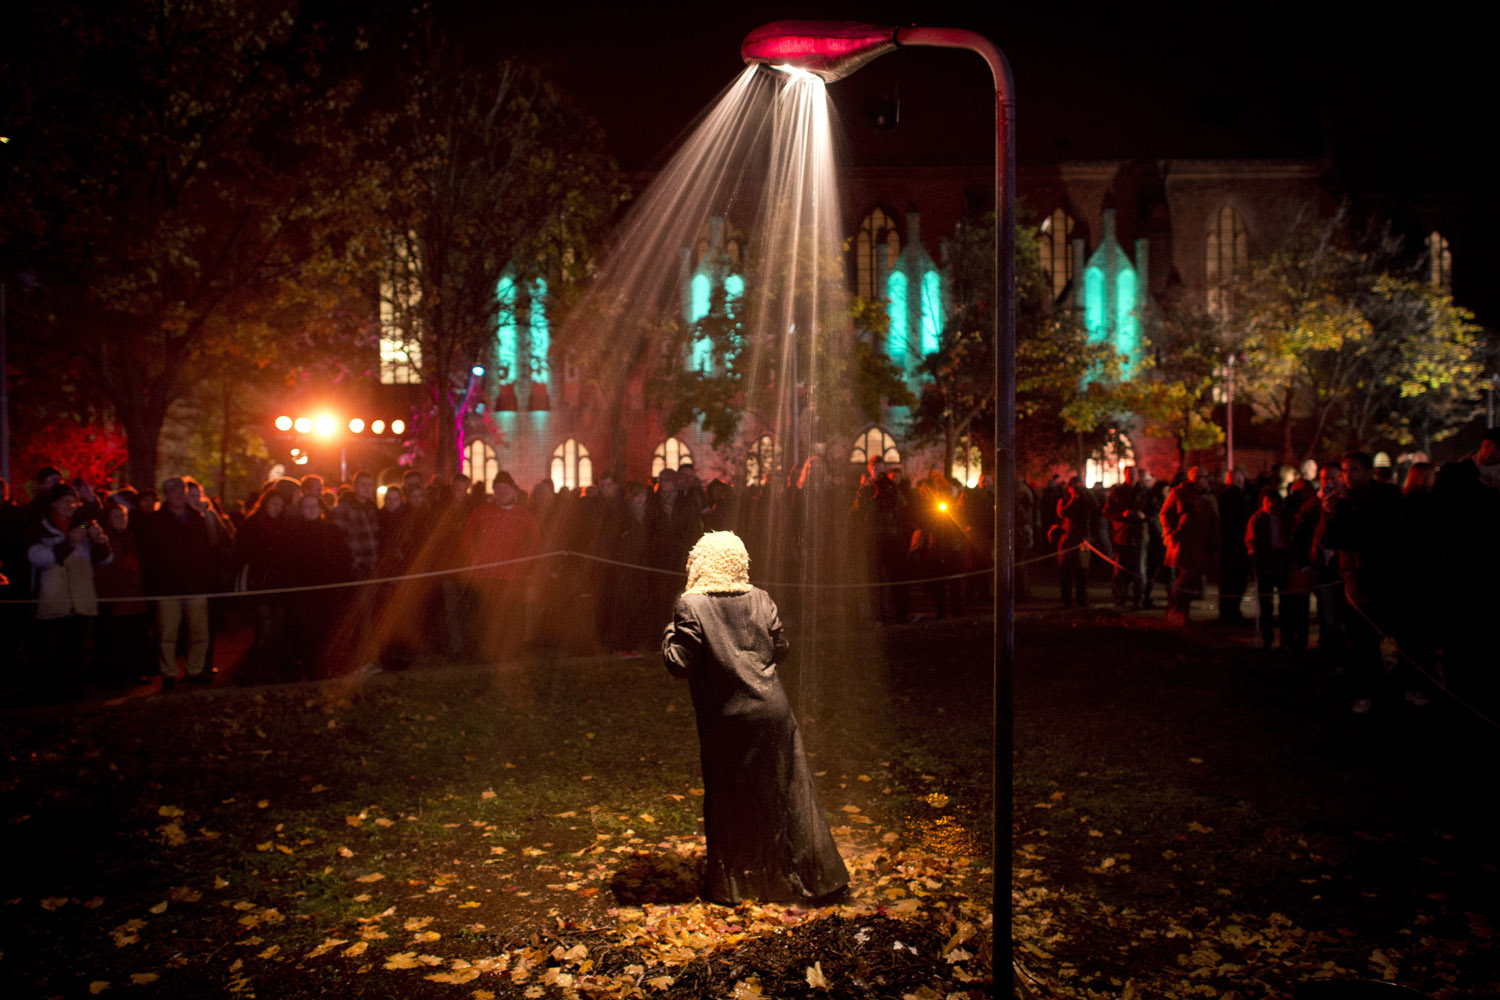 Image: Oct. 28, 2012. A performer stands in a streetlight shower as part of an installation to celebrate the city's 775th anniversary in Berlin's Nikolai Quarter.